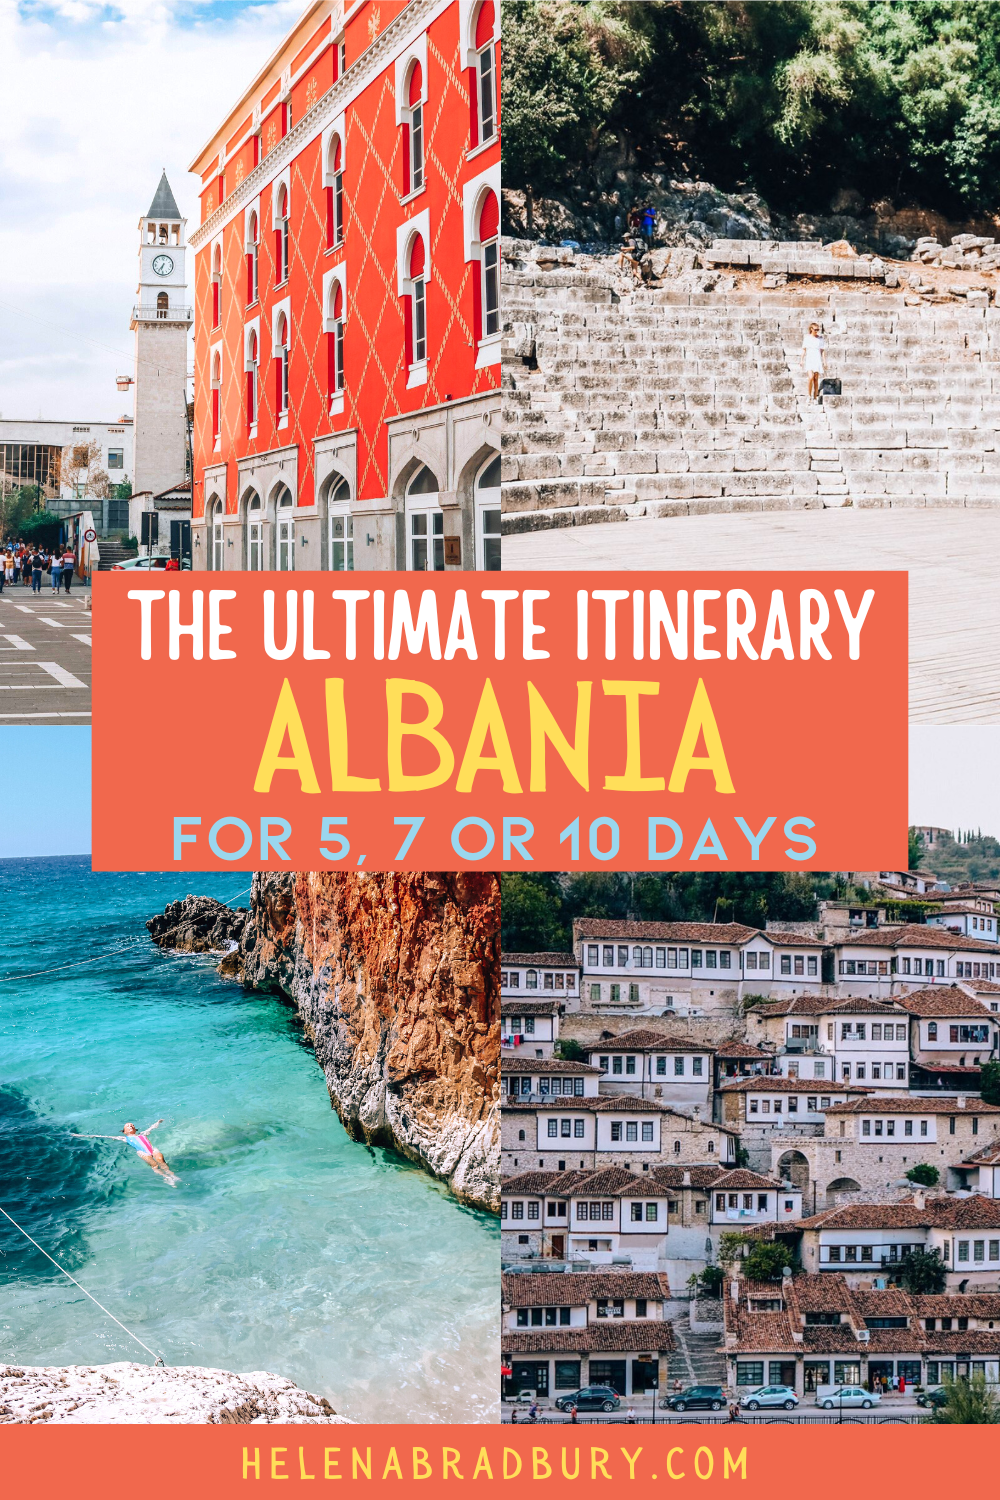 The Ultimate itinerary in Albania: for 5, 7 or 10 days — Helena Bradbury